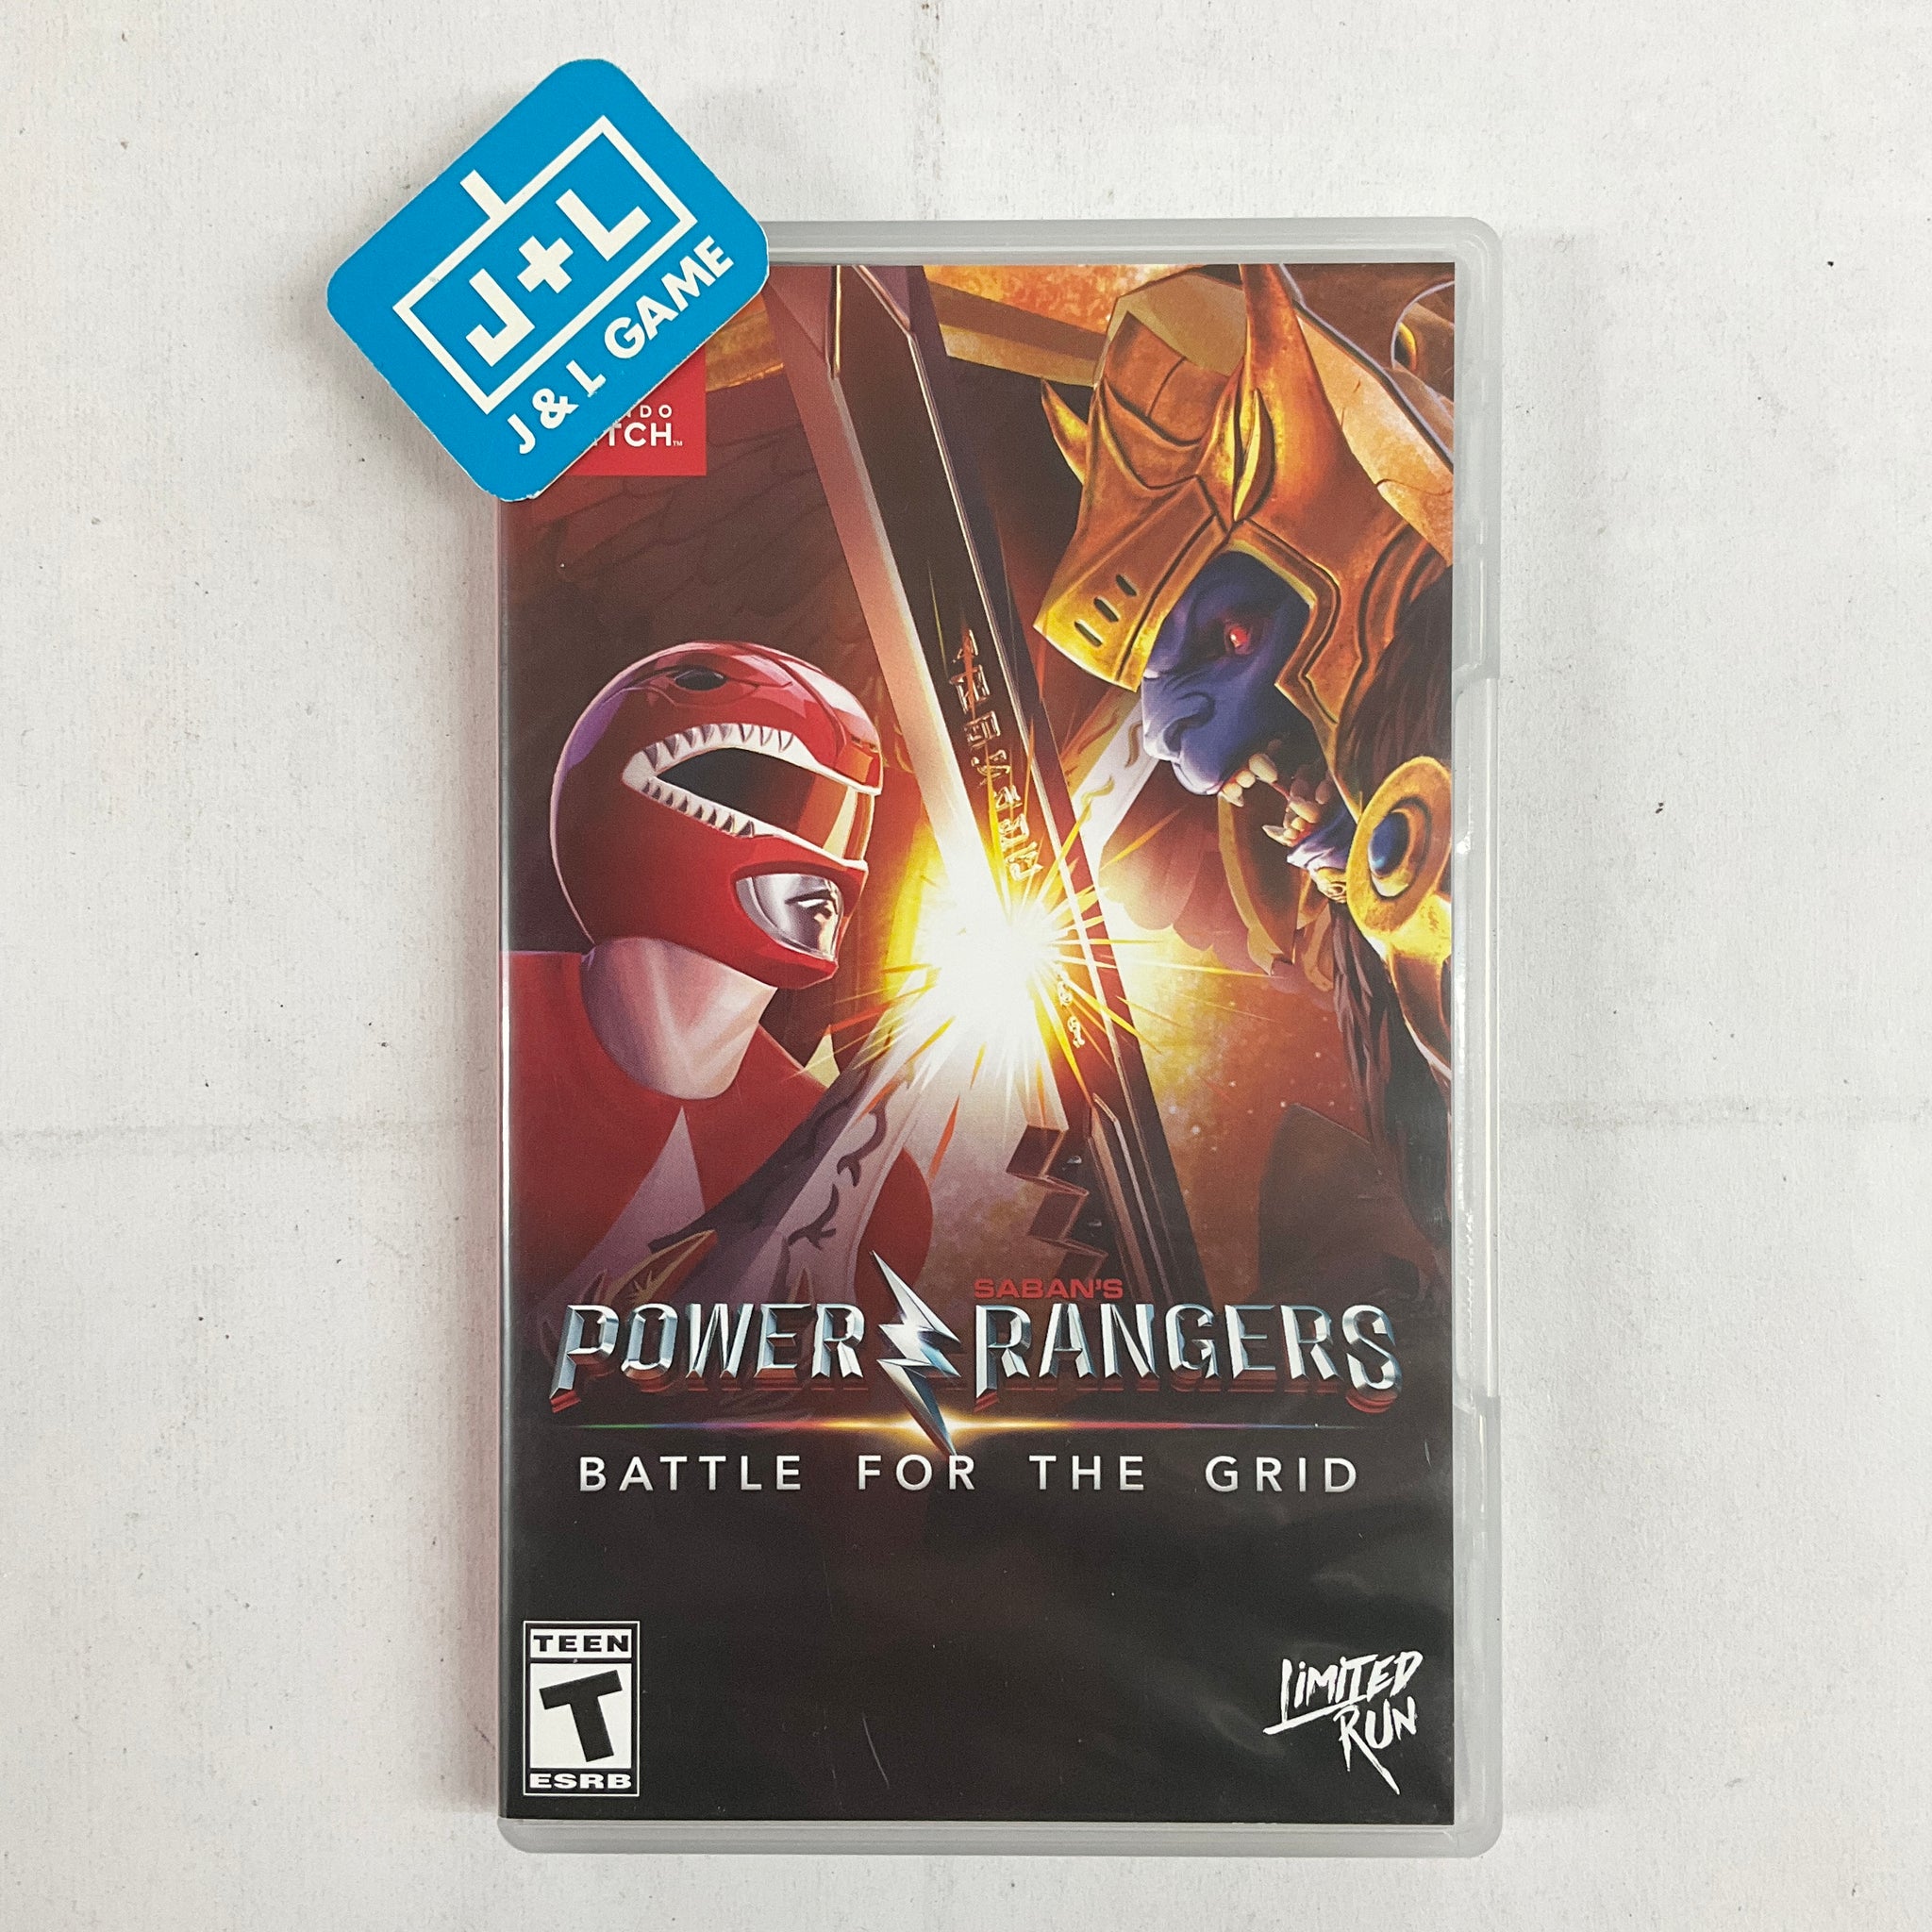 Power Rangers: Battle for the Grid (Limited Run #038) - (NSW) Nintendo Switch [Pre-Owned] Video Games Limited Run Games   